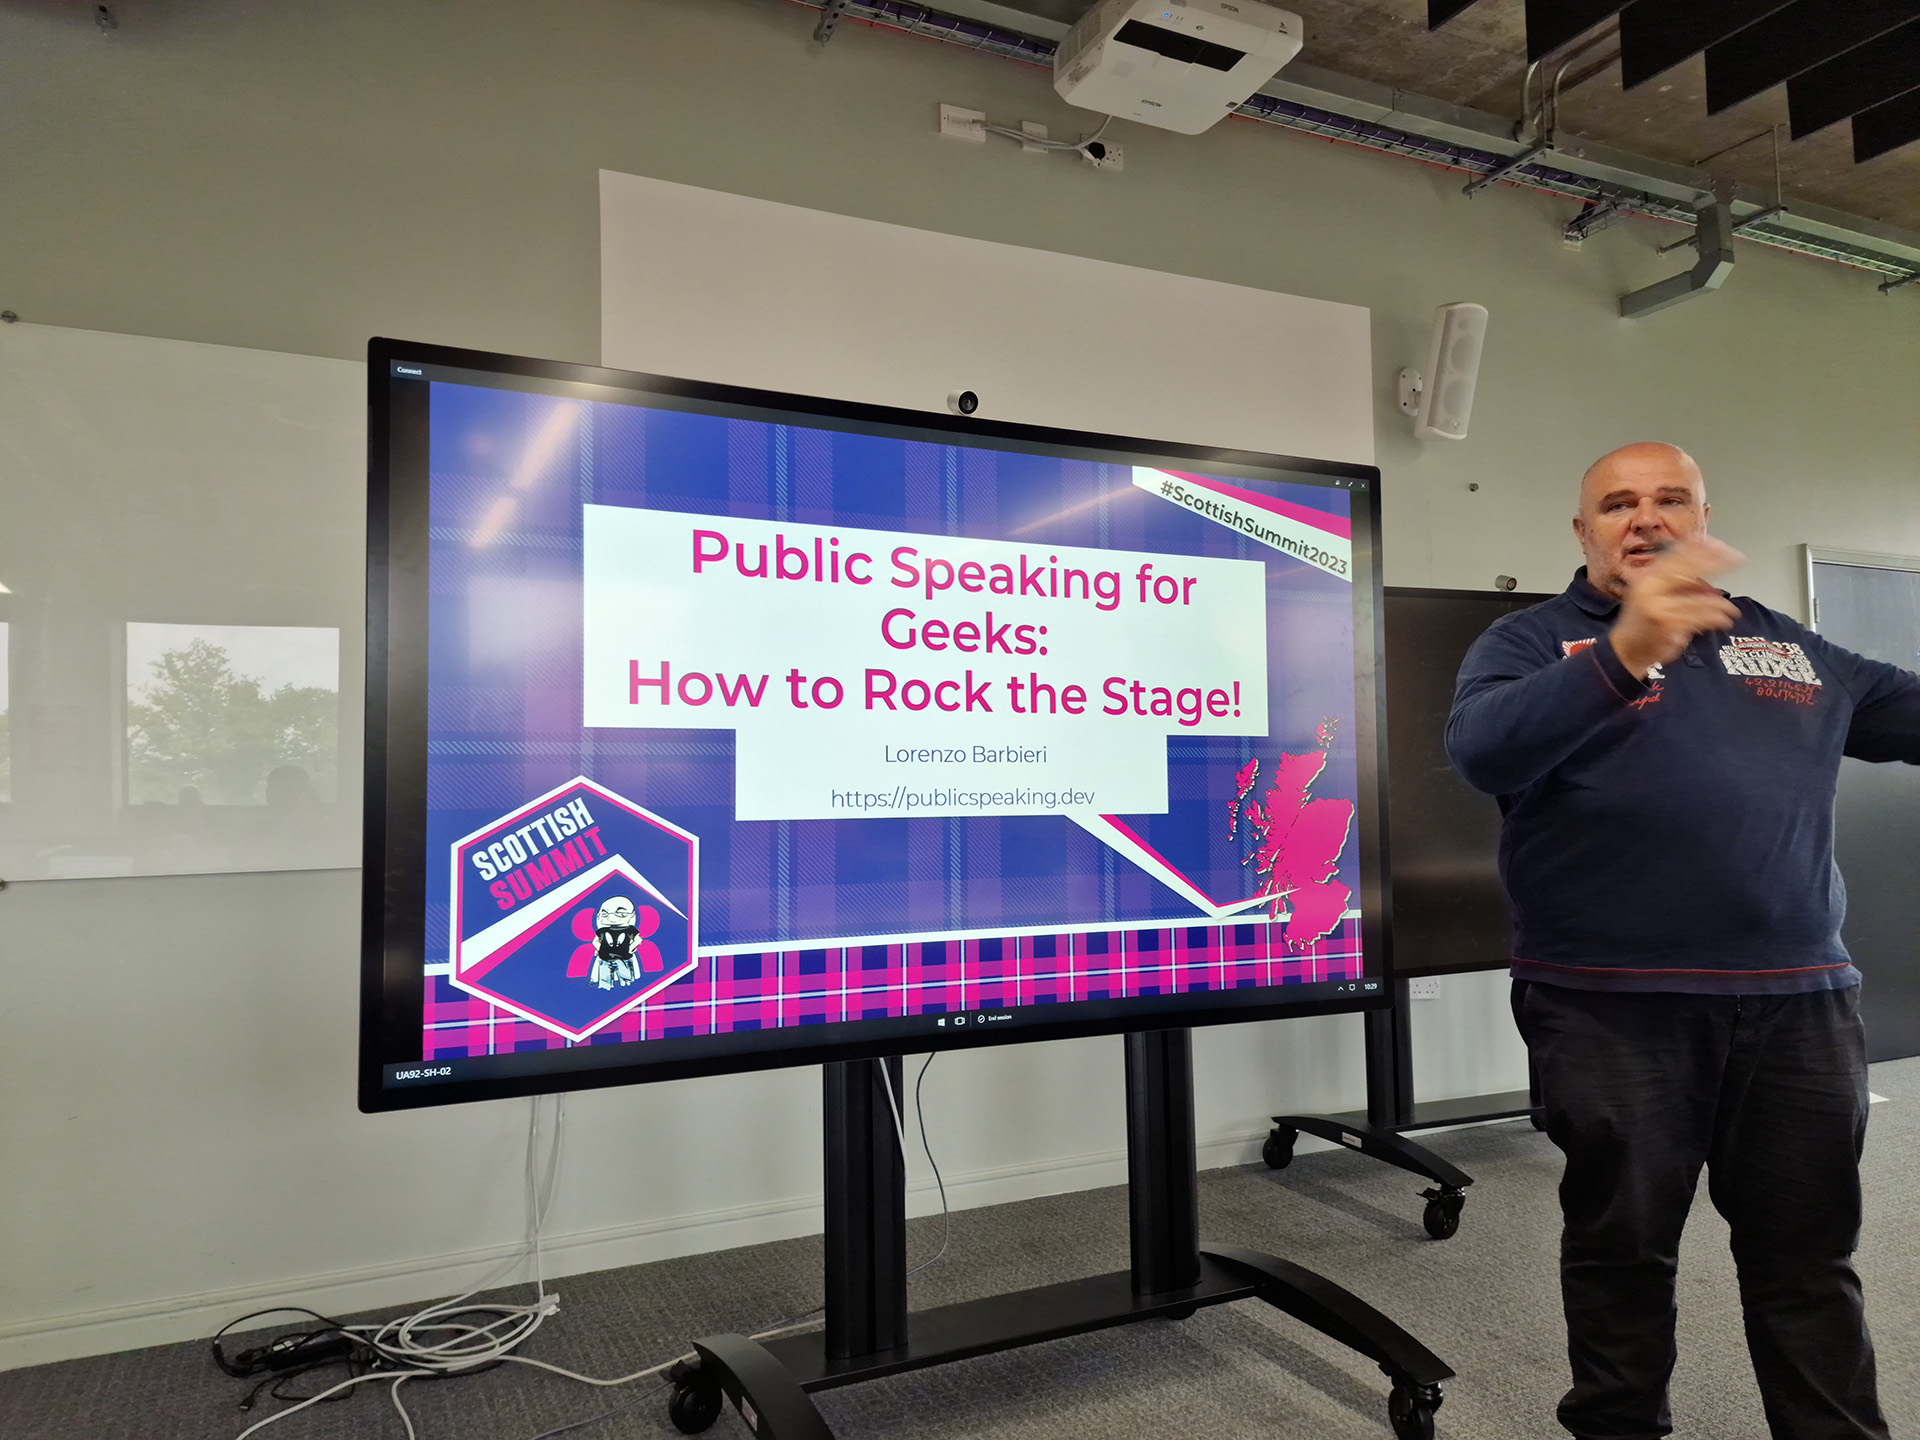 Public speaking for geeks: how to rock the stage!